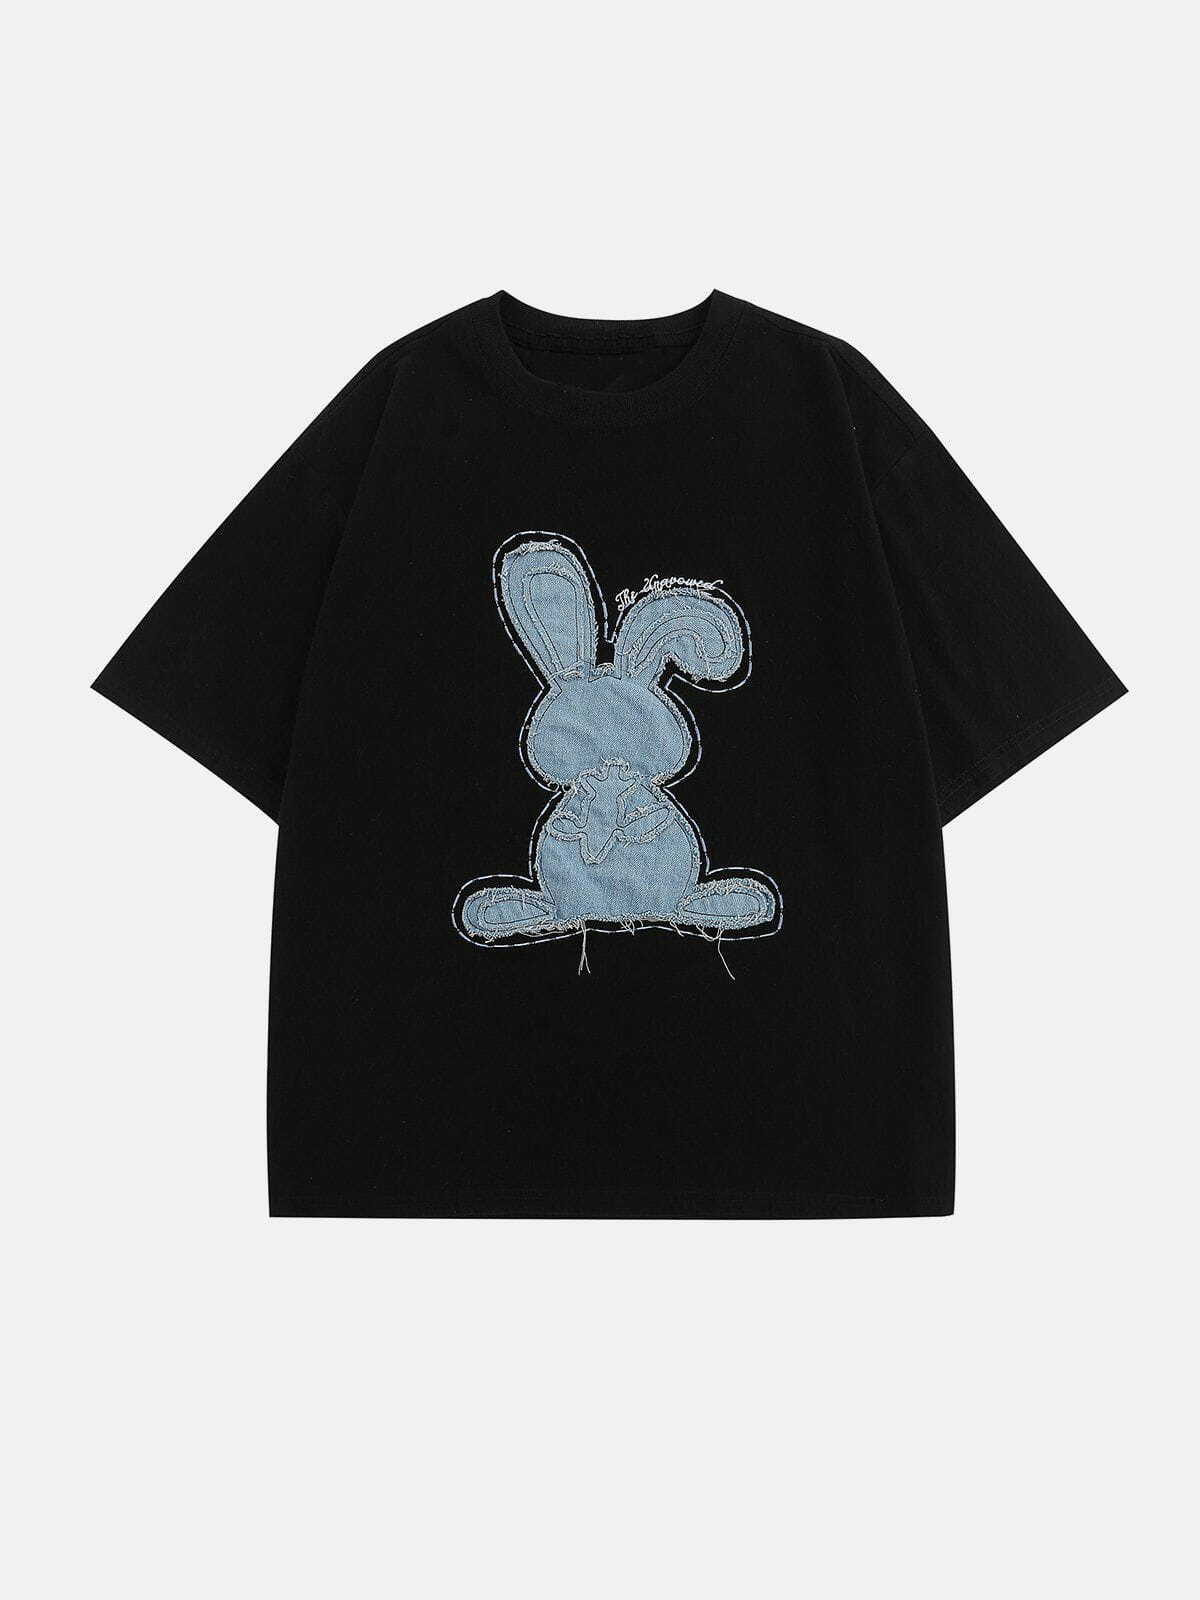 denim rabbit tee applique embroidery [youthful] 4414